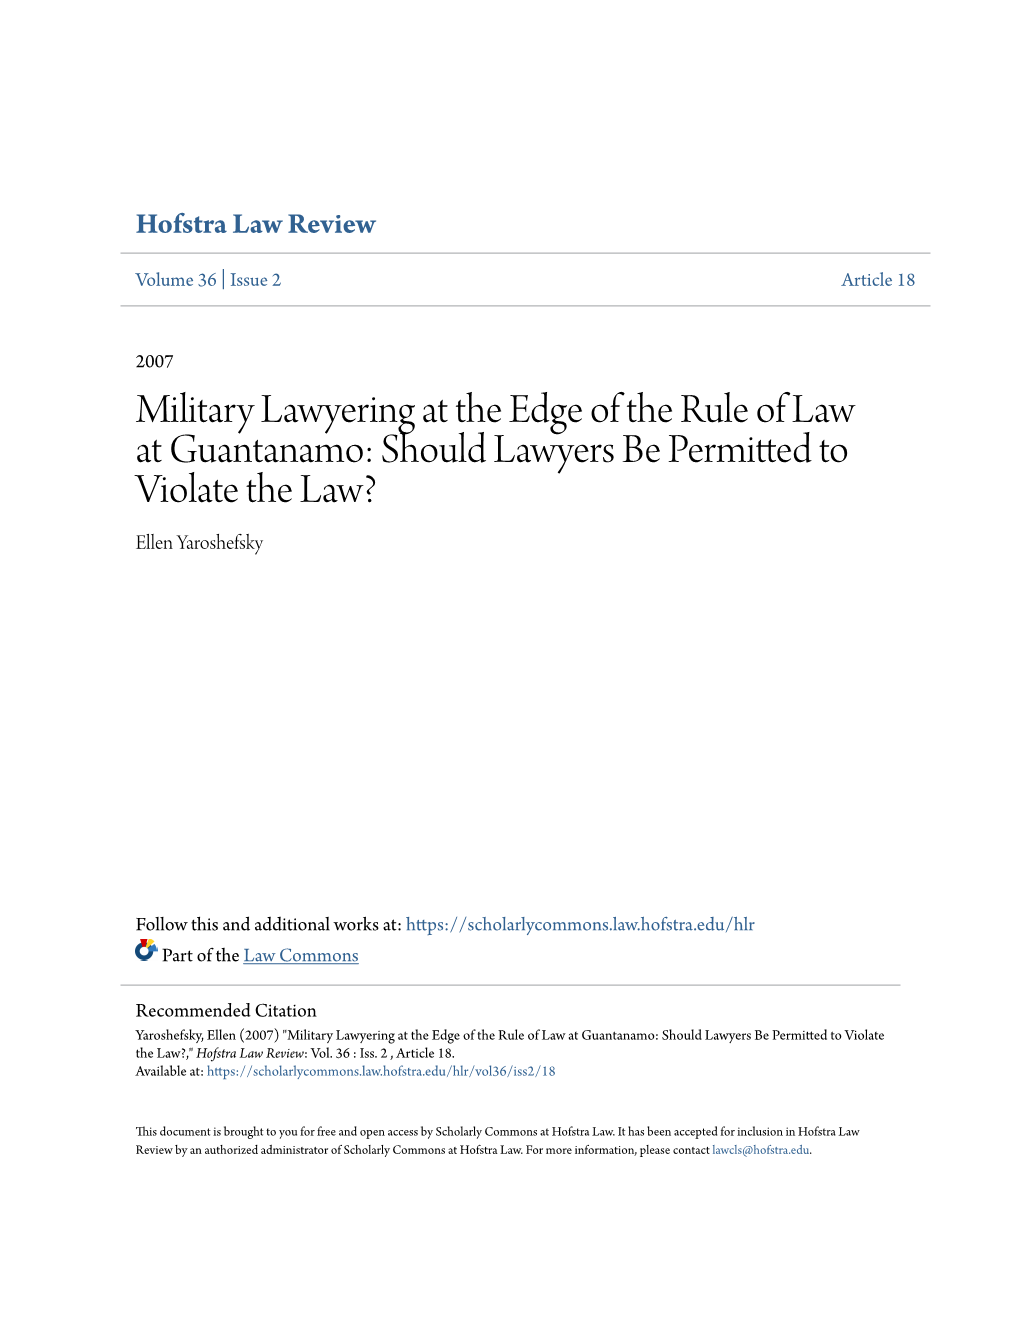 Military Lawyering at the Edge of the Rule of Law at Guantanamo: Should Lawyers Be Permitted to Violate the Law? Ellen Yaroshefsky